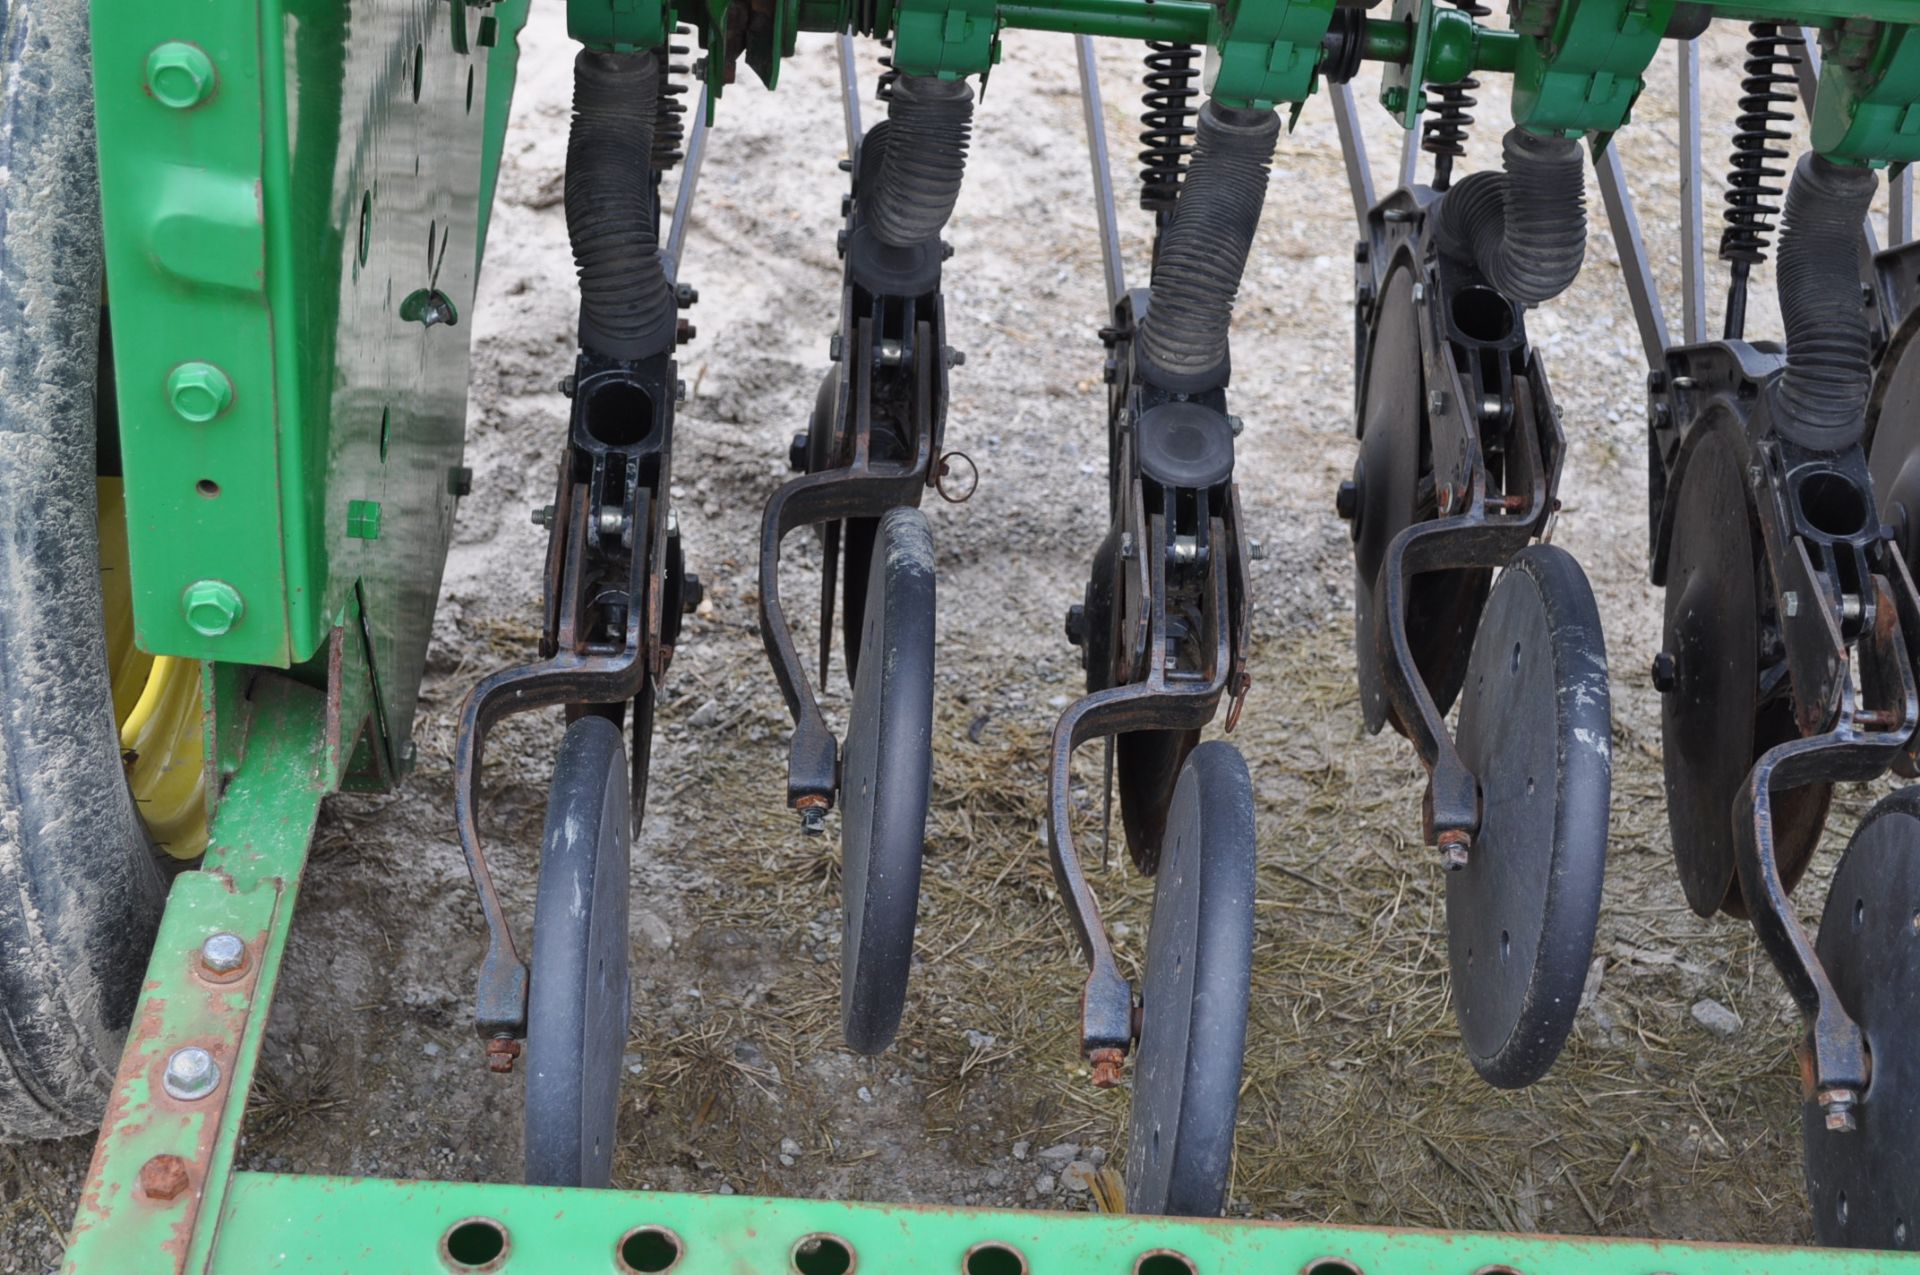 John Deere 450 end wheel grain drill, 17 hole, 7.50-20 tires, SN 690610, low acres - Image 5 of 8